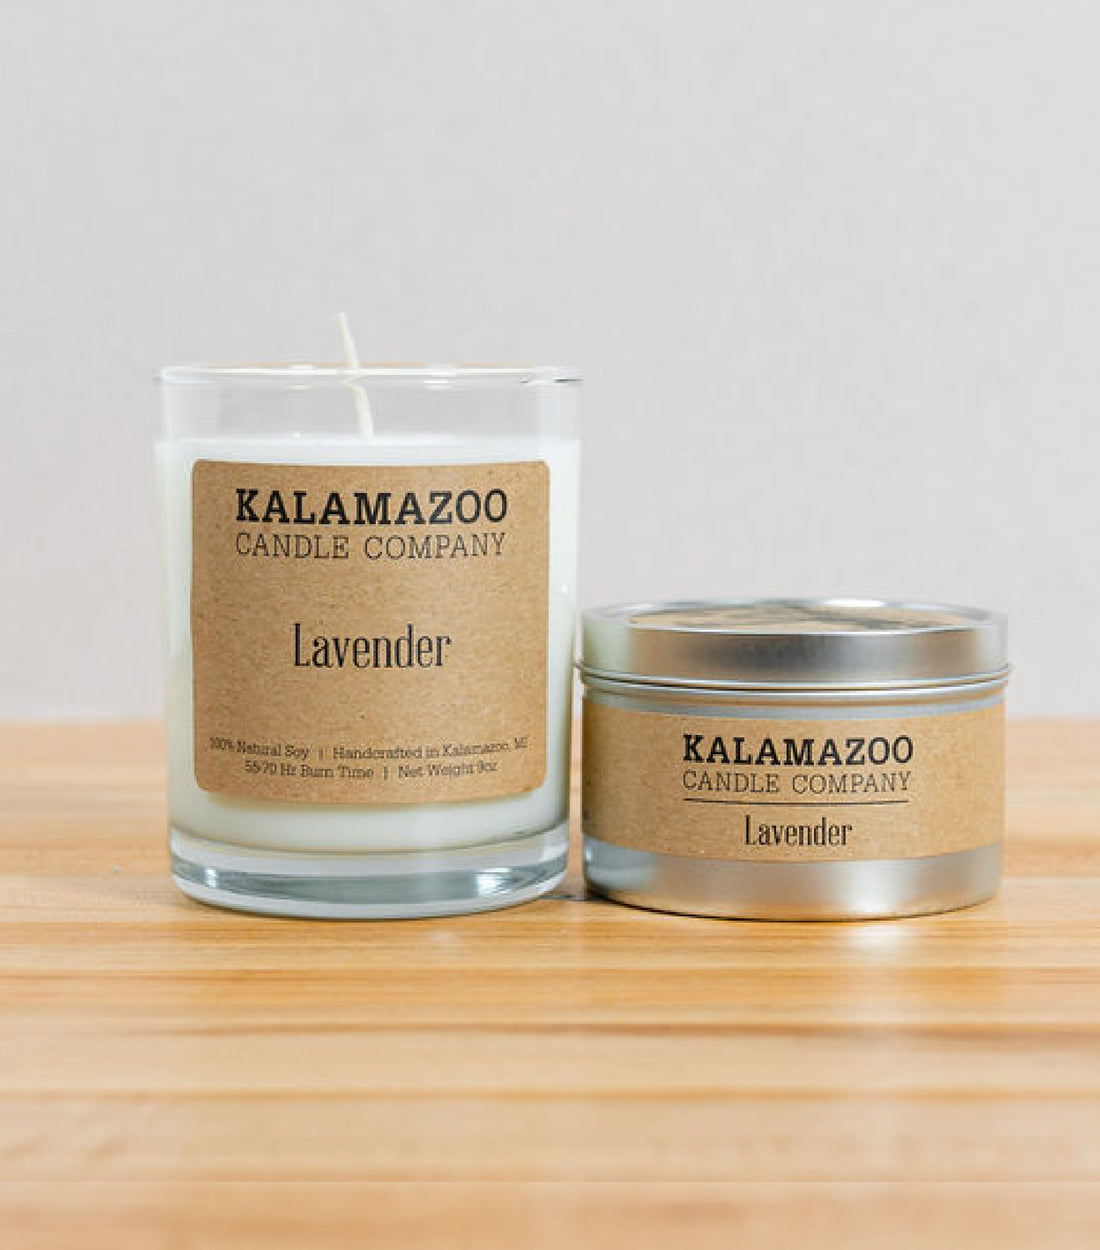 Lavender Candles Like a French countryside in bloom, this classic soy candle has notes of calming French lavender warmed by sophisticated sandalwood and pink peppercorn. All Kalamazoo Candles are: 100% natural scented soy wax; produced using locally sourced ingredients